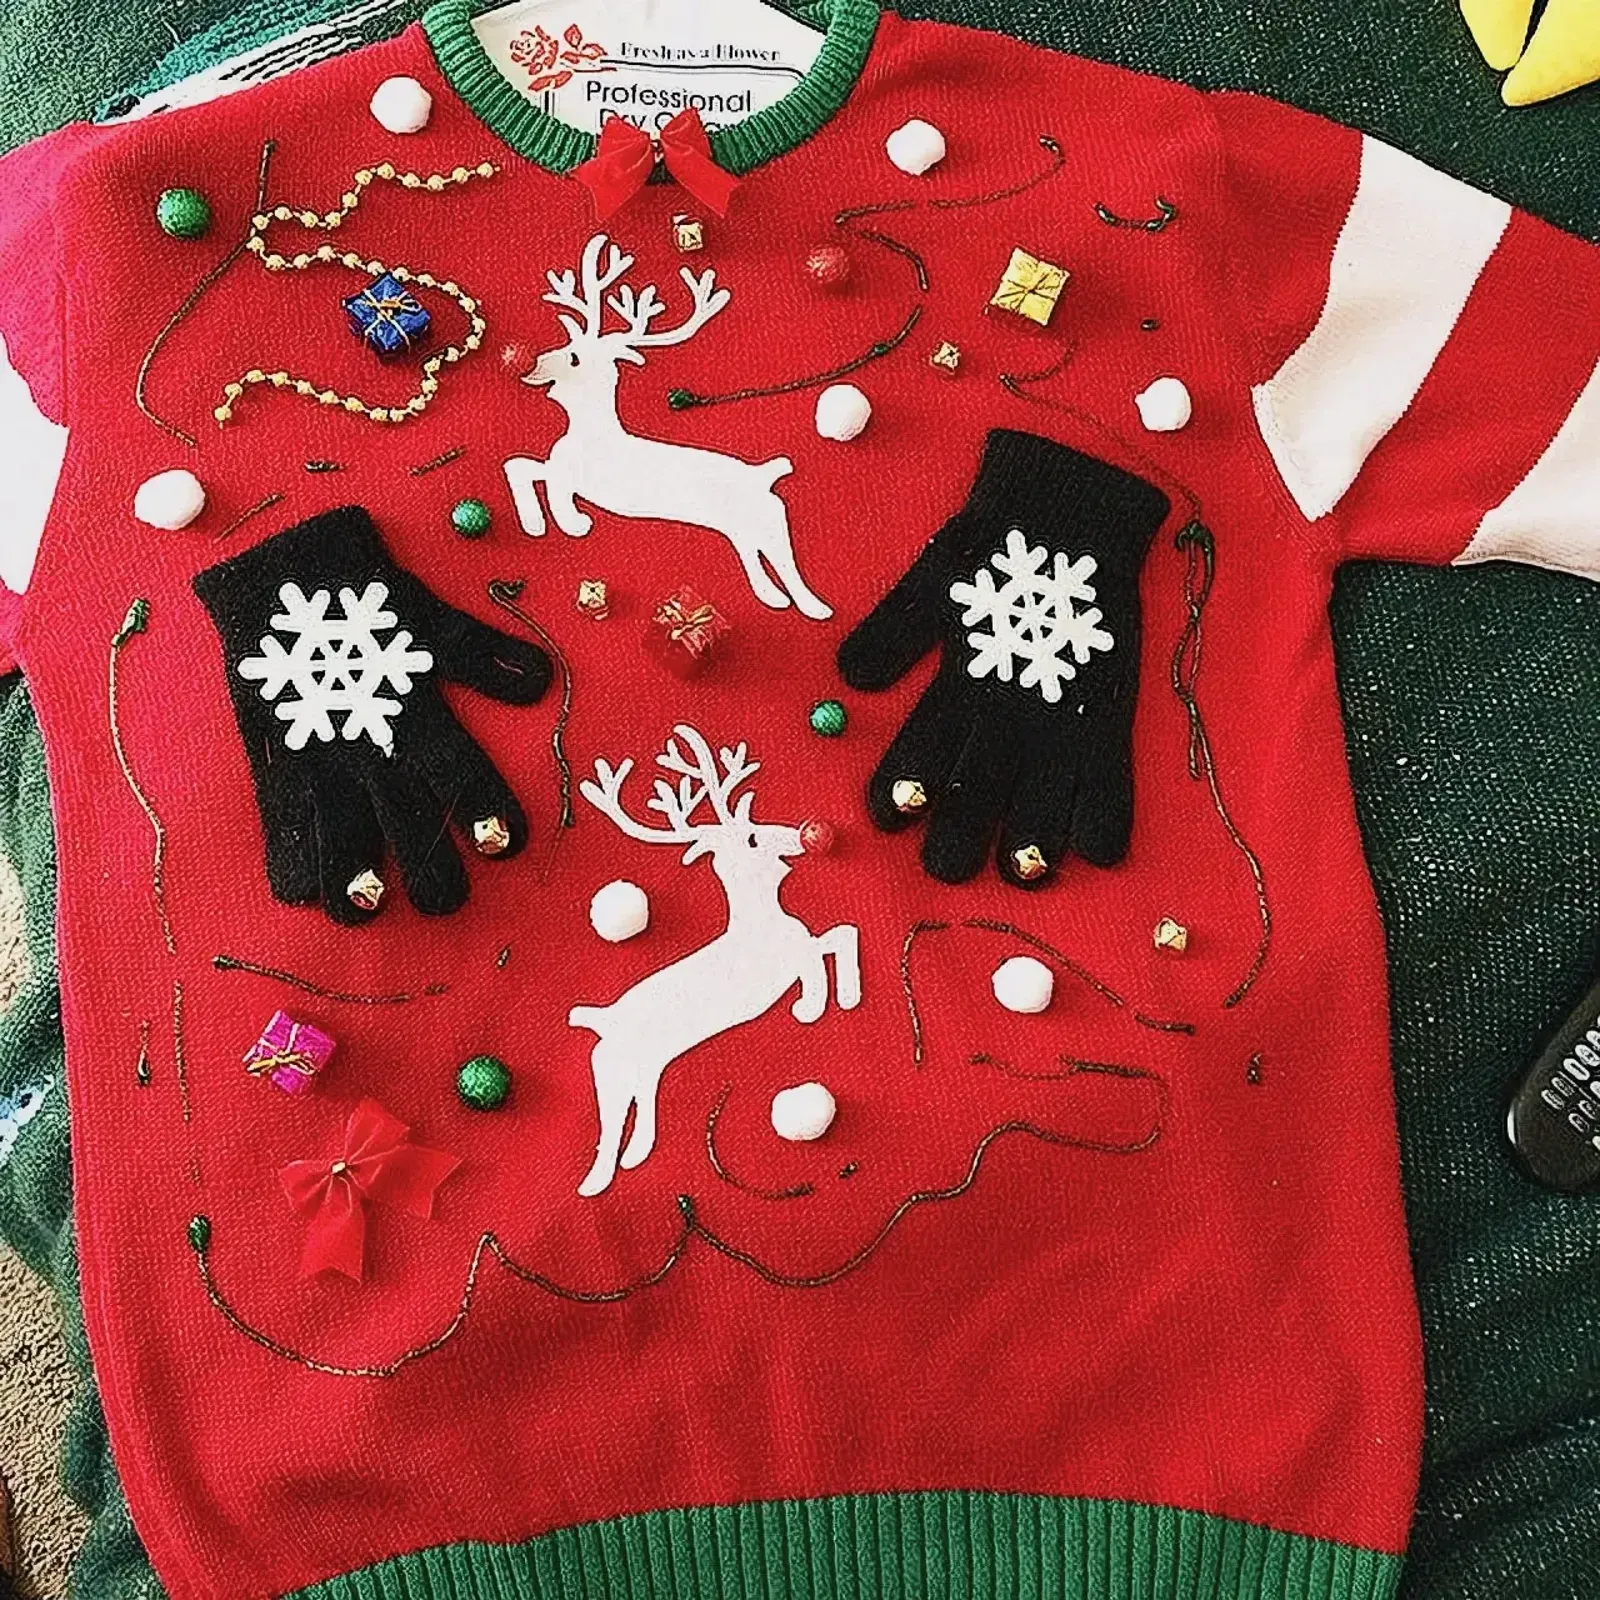 Festive red and green Christmas sweater with reindeer pattern.